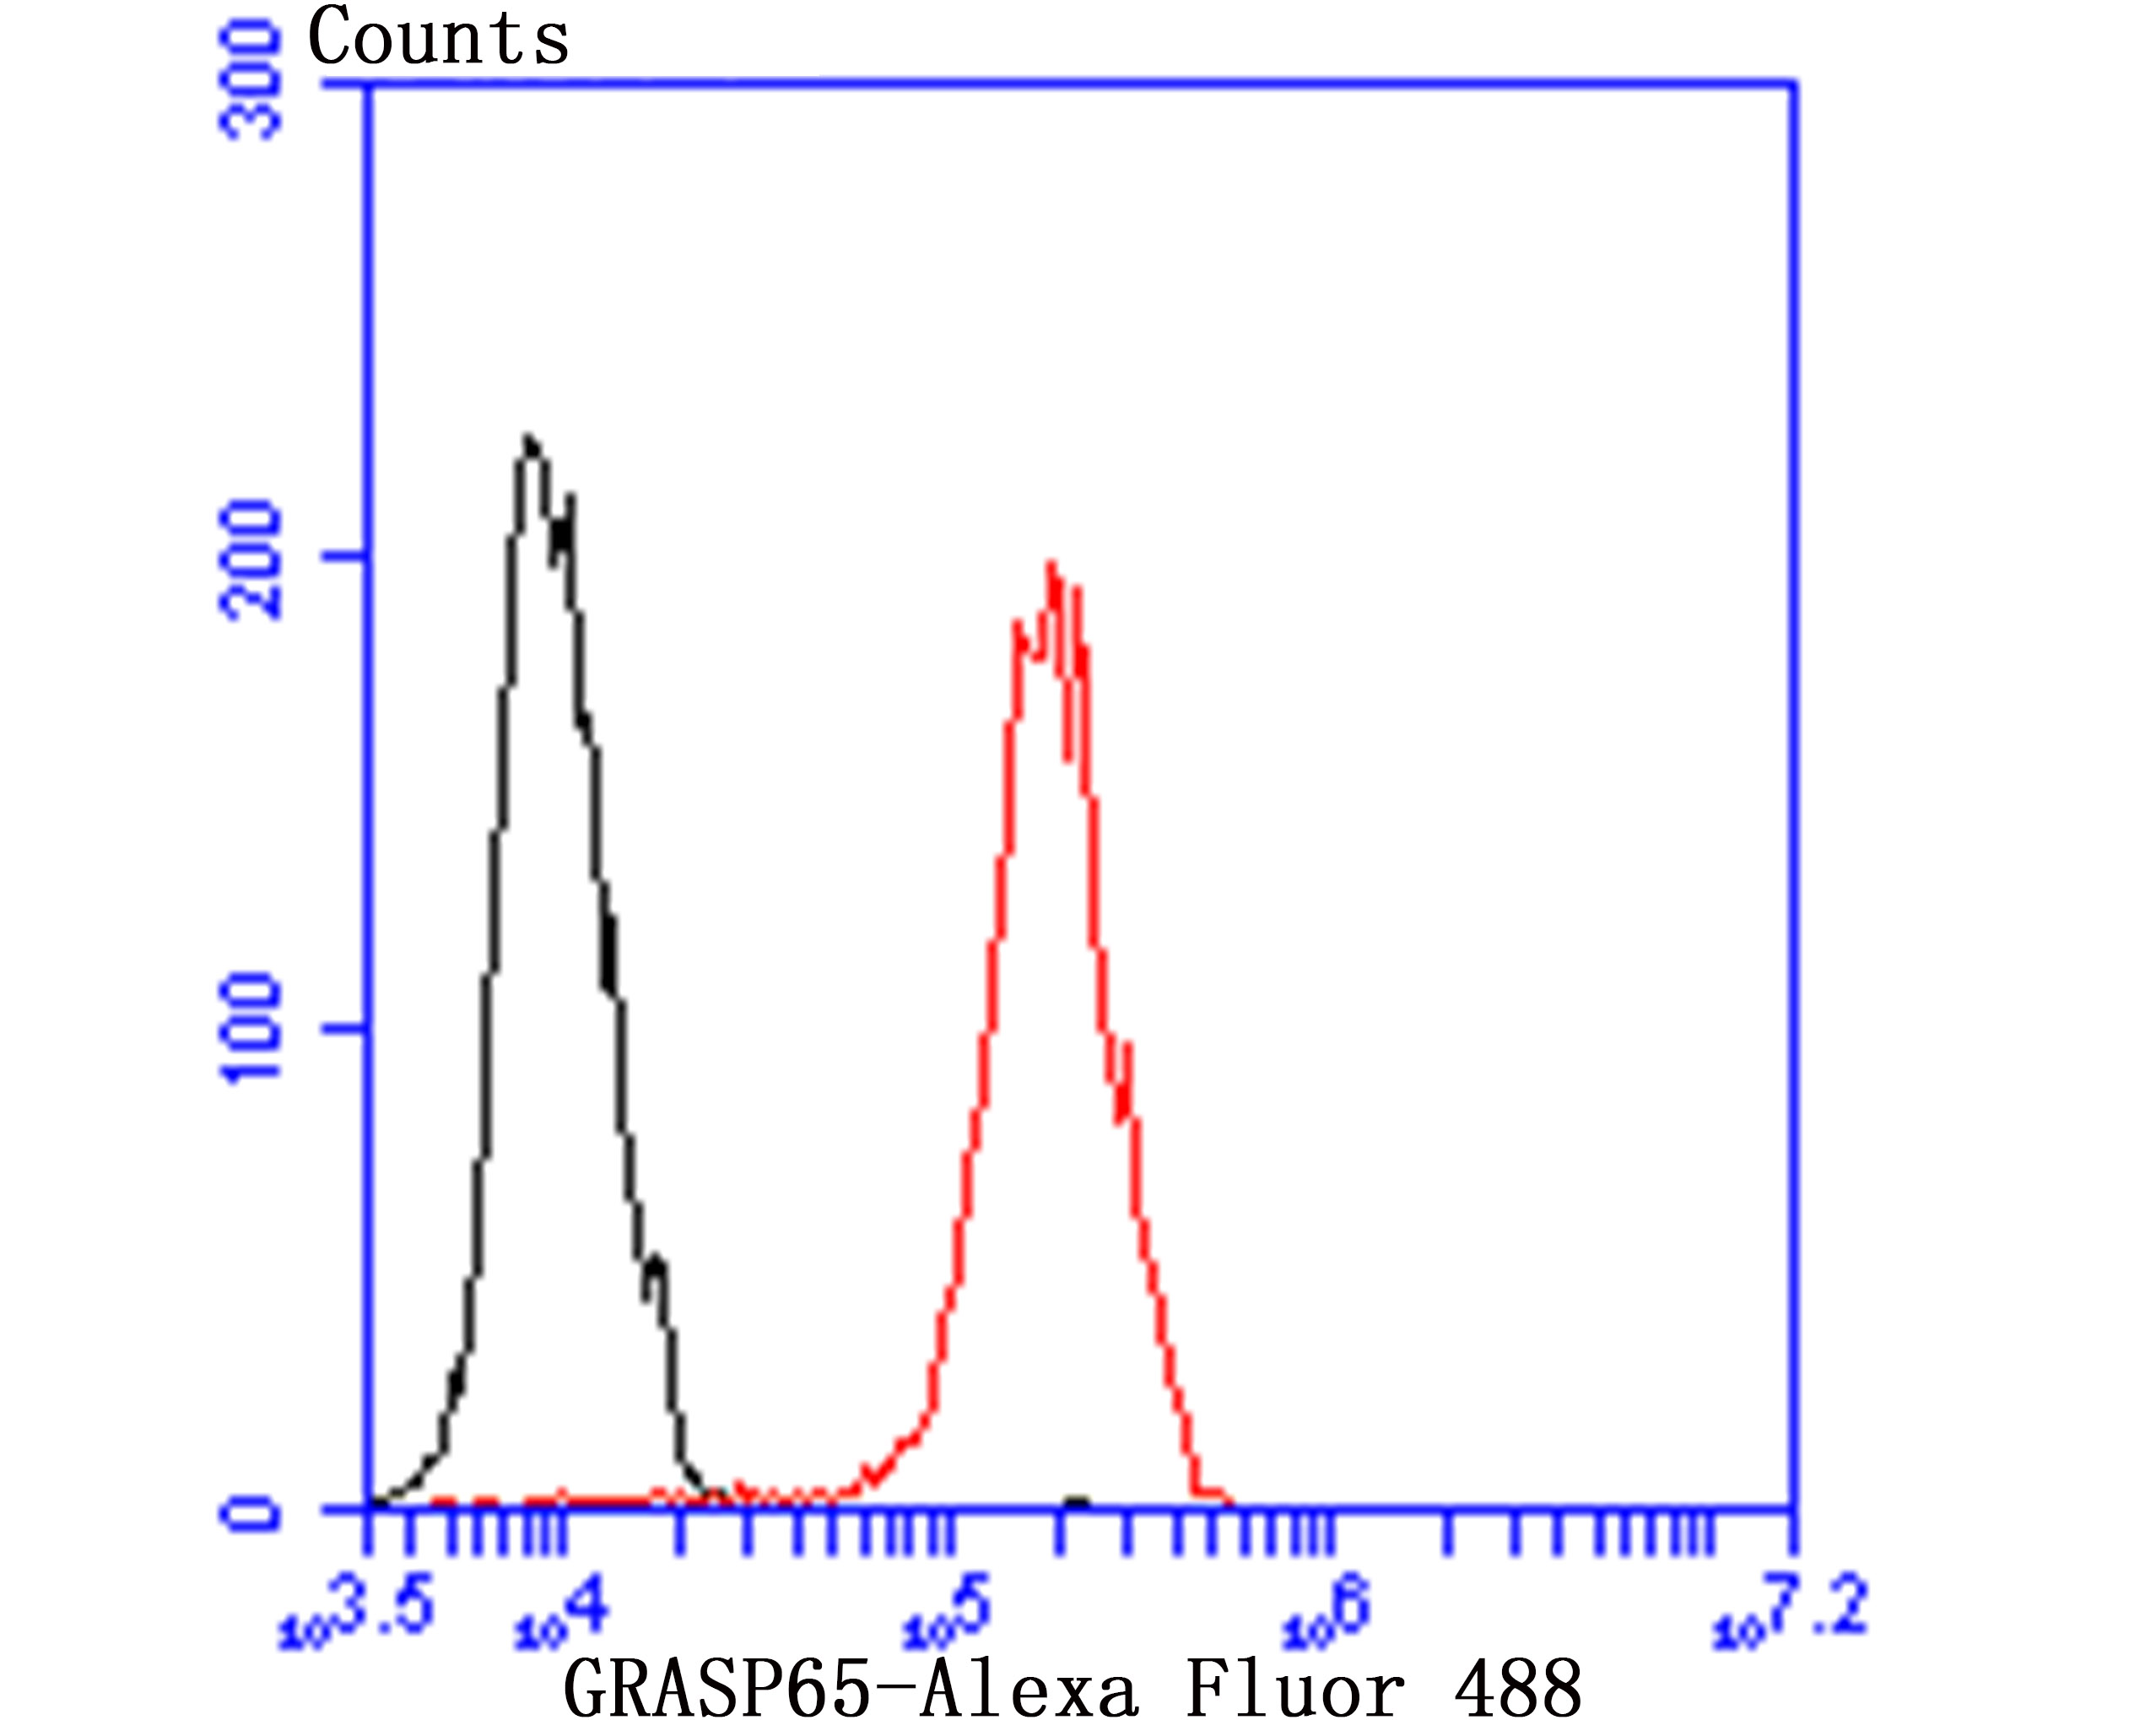 Flow cytometric analysis of GRASP65 was done on MCF-7 cells. The cells were fixed, permeabilized and stained with the primary antibody (ET7107-13, 1/50) (red). After incubation of the primary antibody at room temperature for an hour, the cells were stained with a Alexa Fluor®488 conjugate-Goat anti-Rabbit IgG Secondary antibody at 1/1,000 dilution for 30 minutes.Unlabelled sample was used as a control (cells without incubation with primary antibody; black).